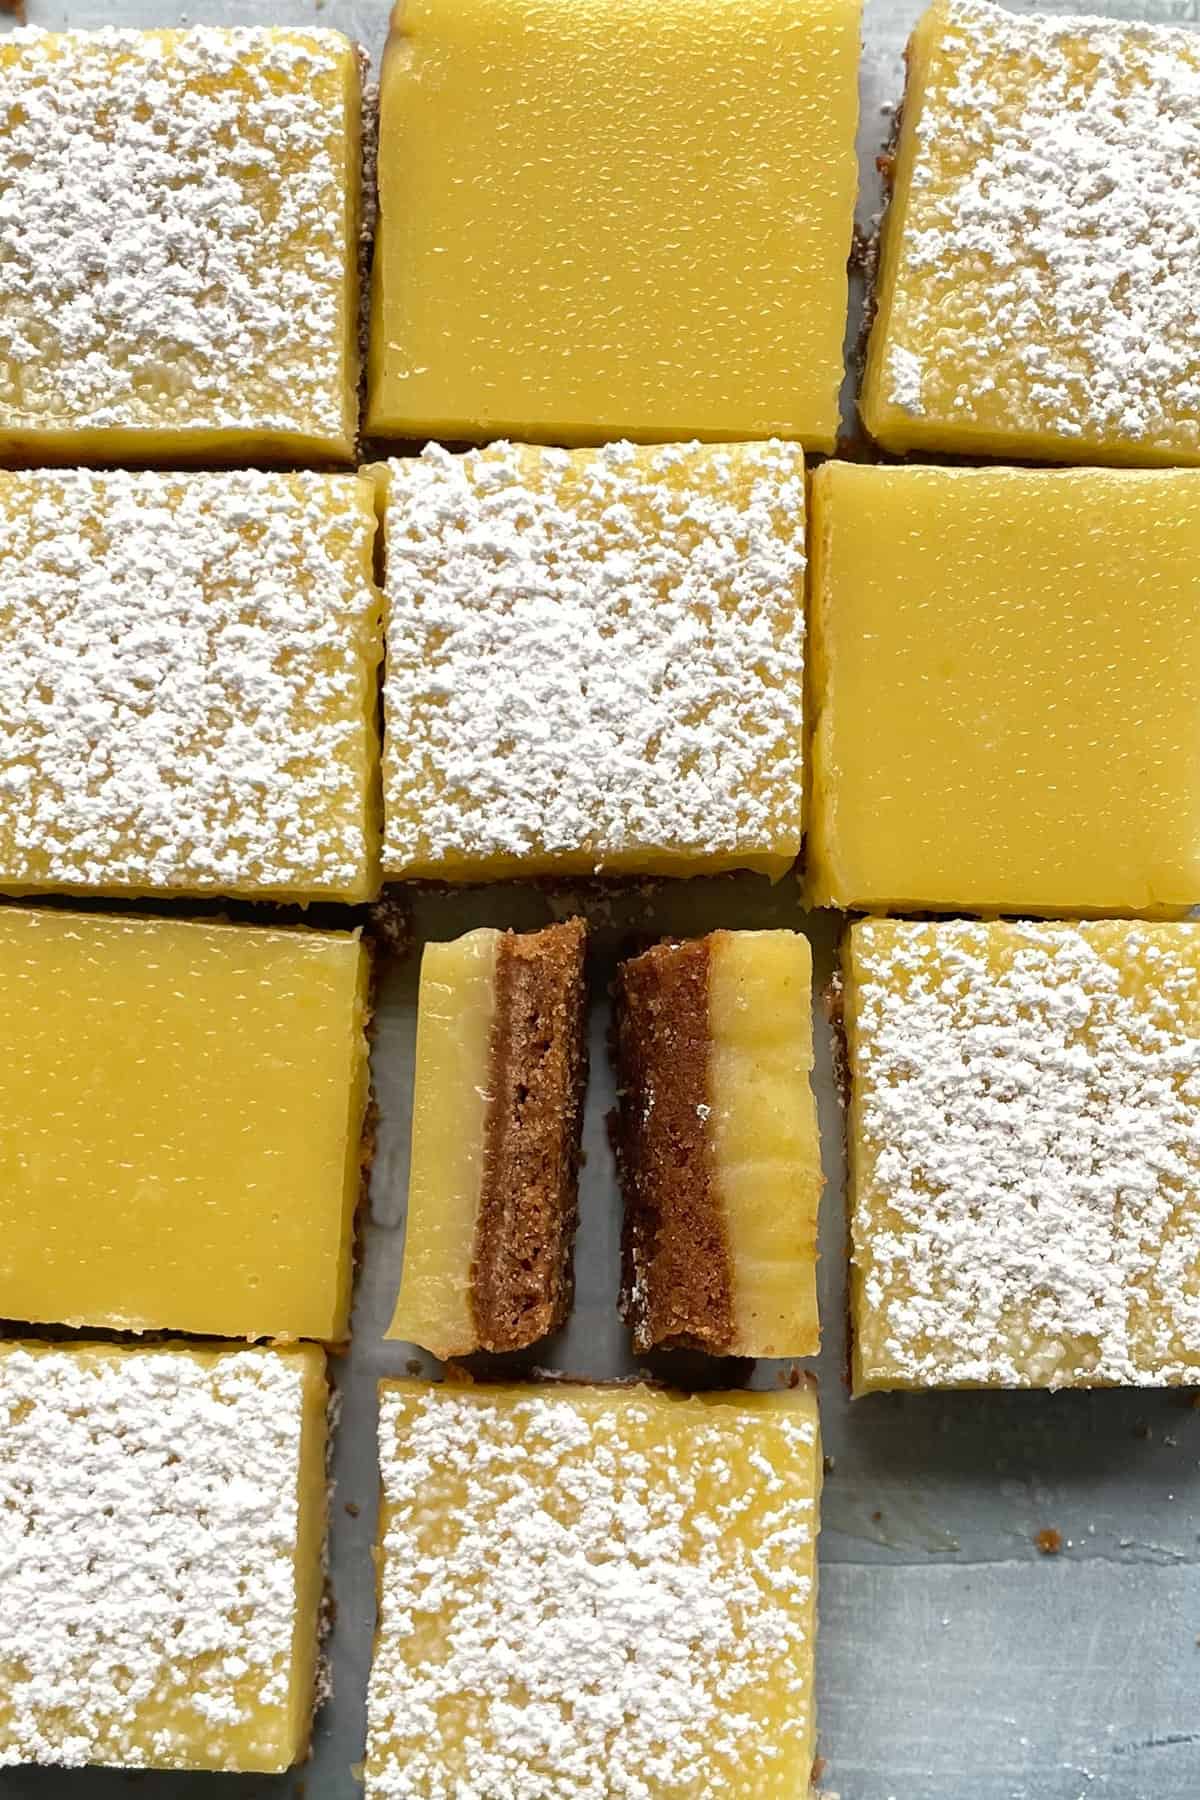 lemon squares on a counter, some dusted with powdered sugar and one turned on its side.